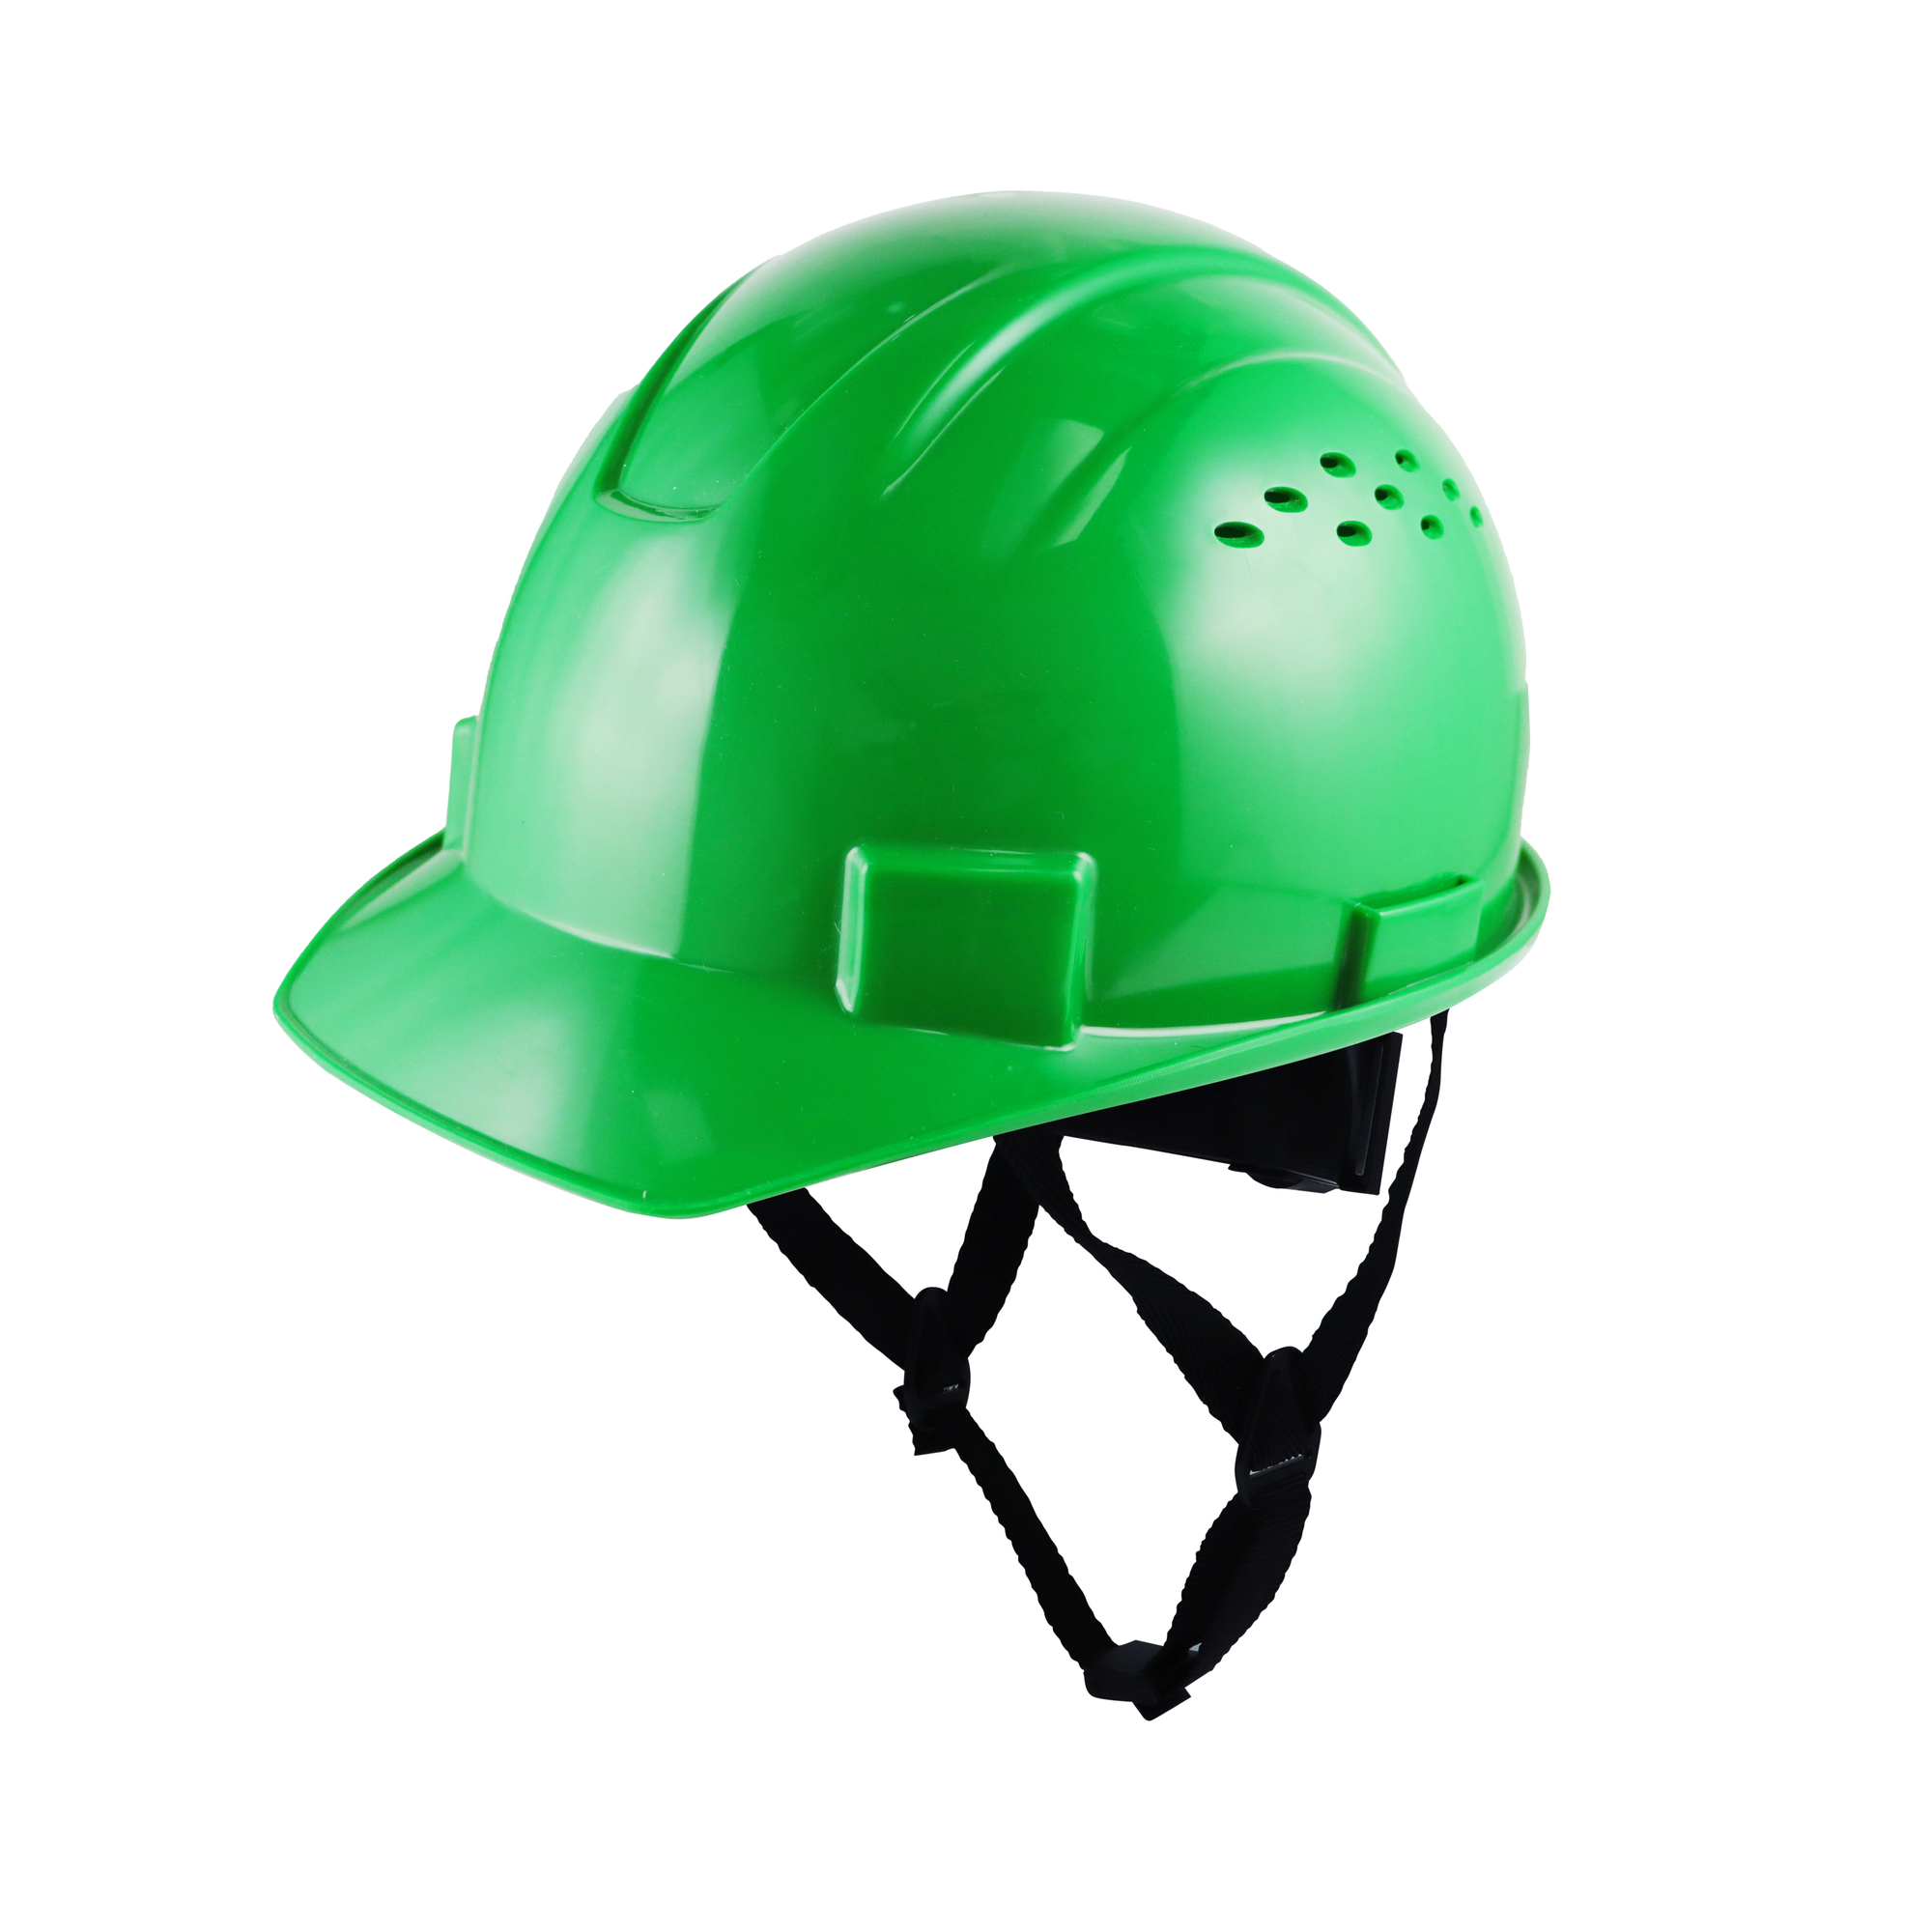 General Electric, Safety Helmet Vented- Green, Hard Hat Style Helmet, Hat Size One Size, Color Green, Model GH326N